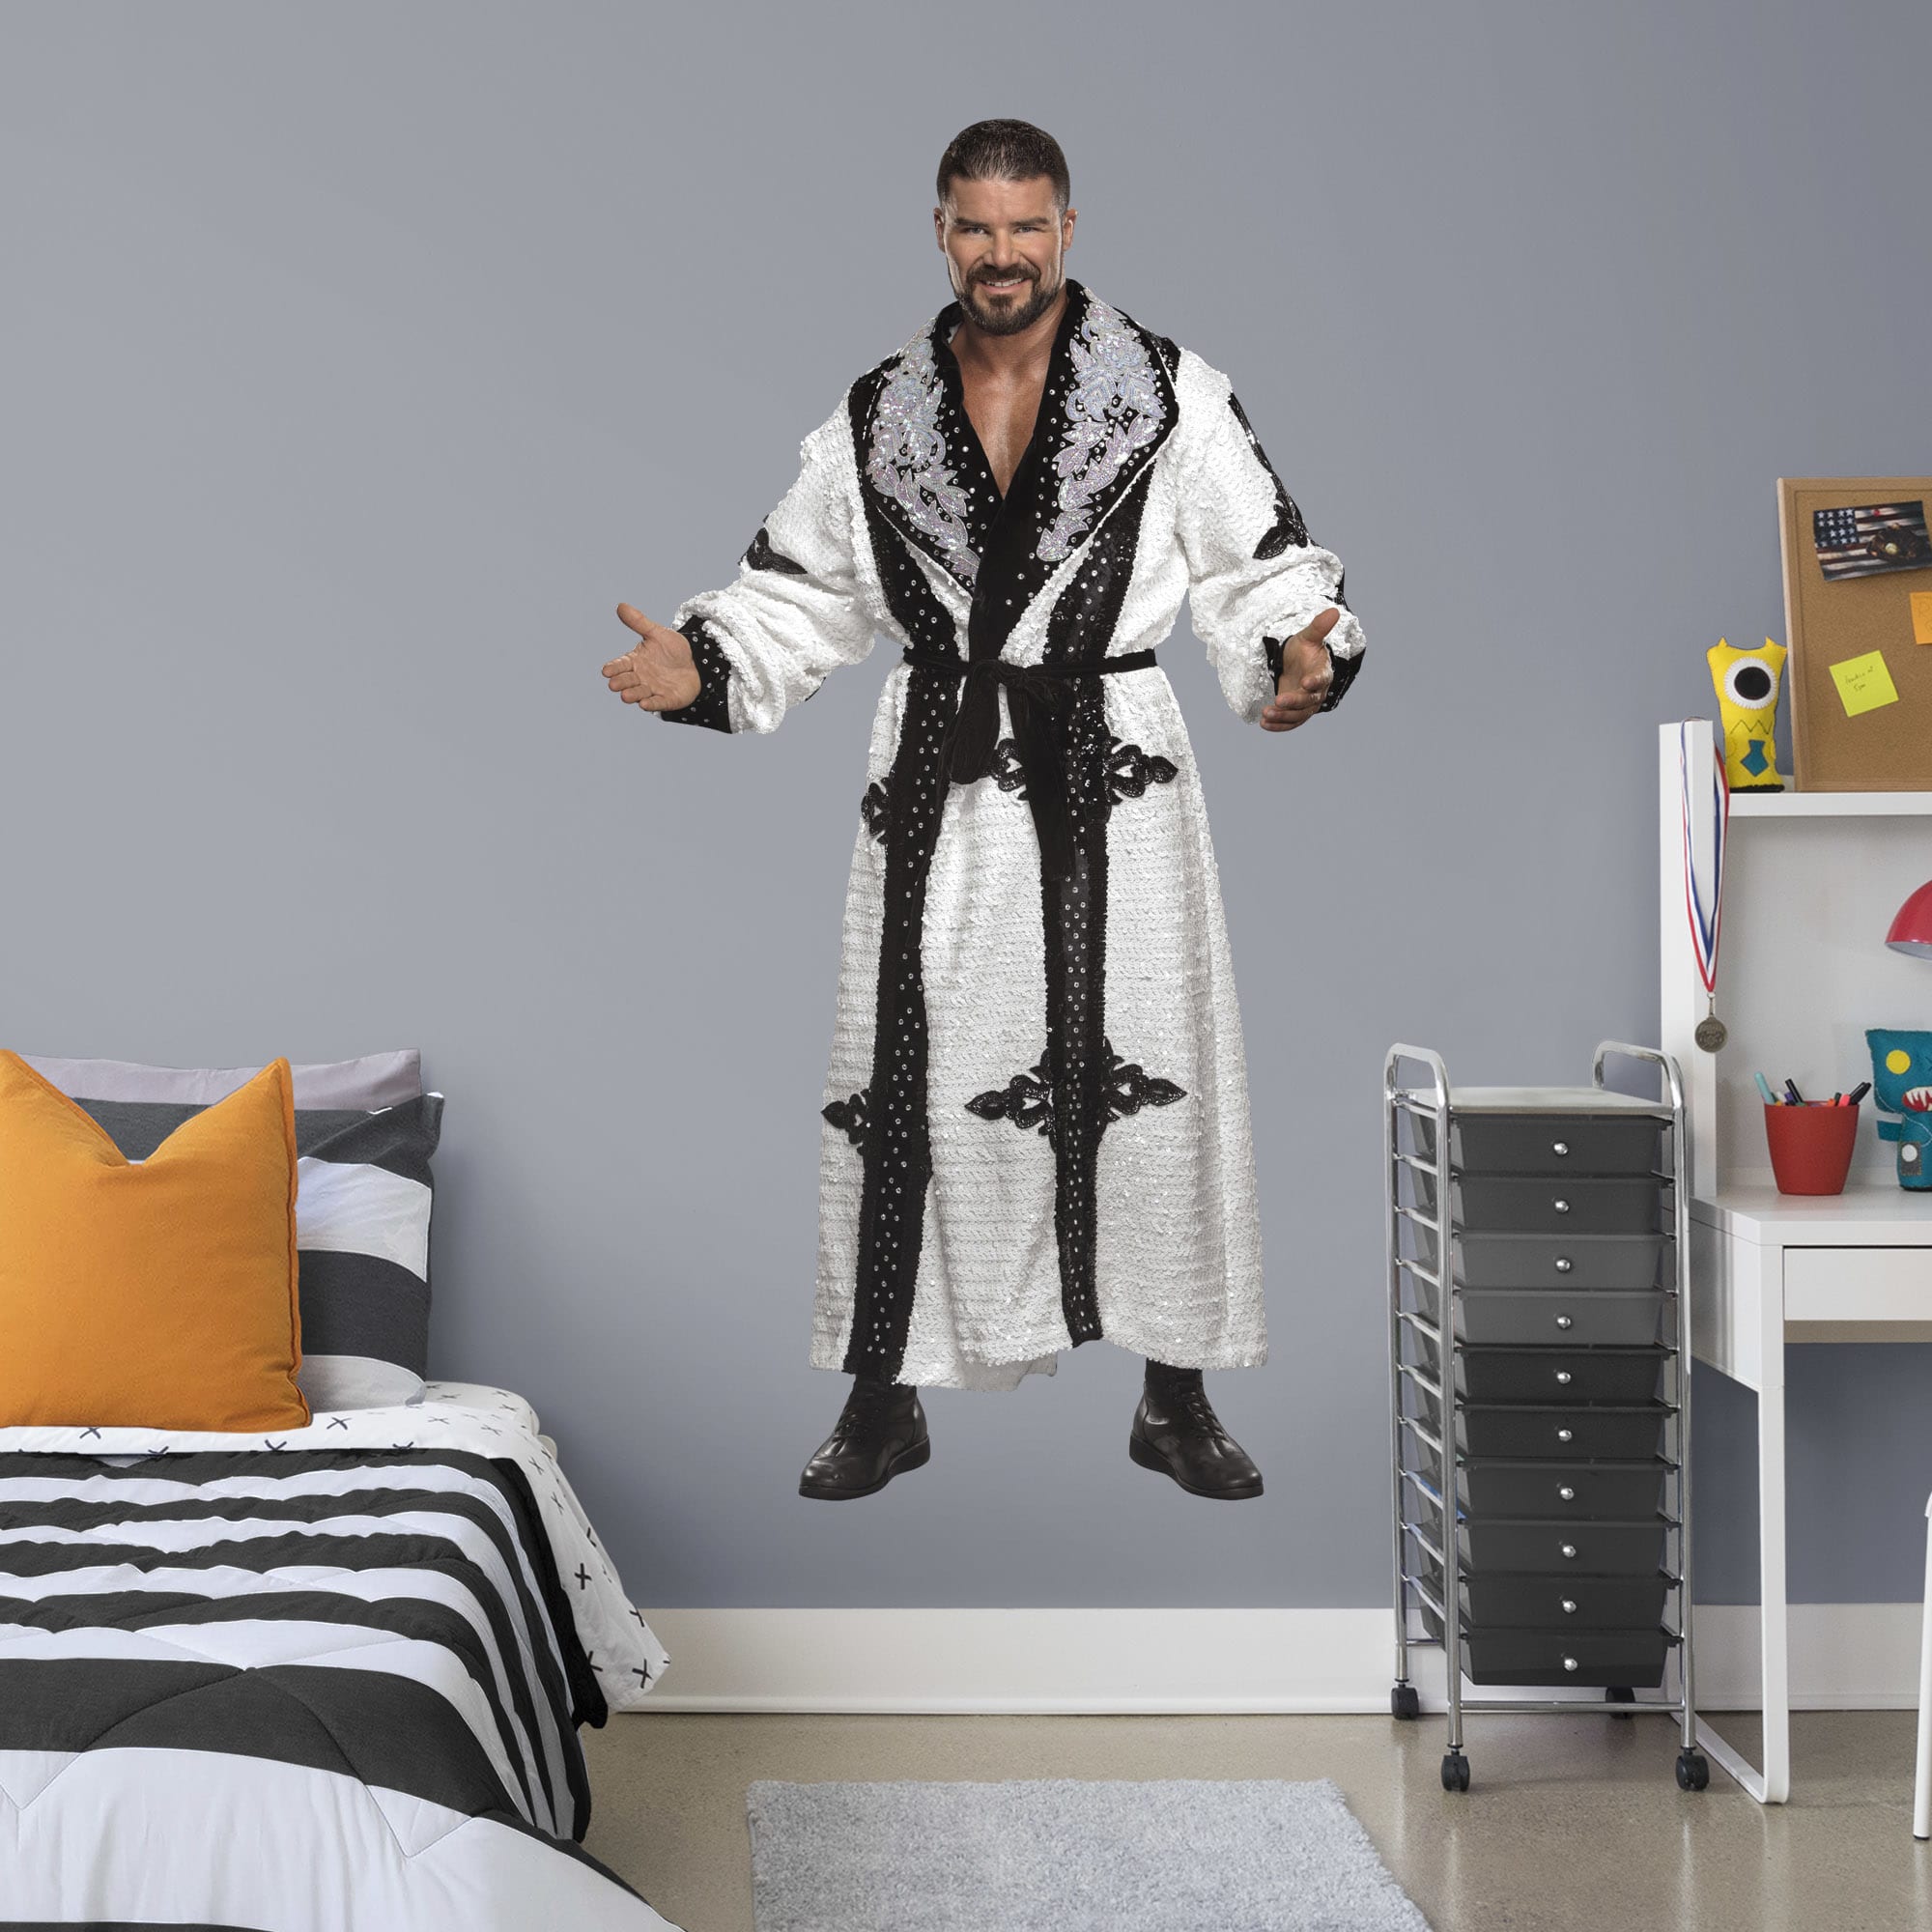 Bobby Roode for WWE - Officially Licensed Removable Wall Decal Life-Size Superstar + 2 Decals (43"W x 78"H) by Fathead | Vinyl